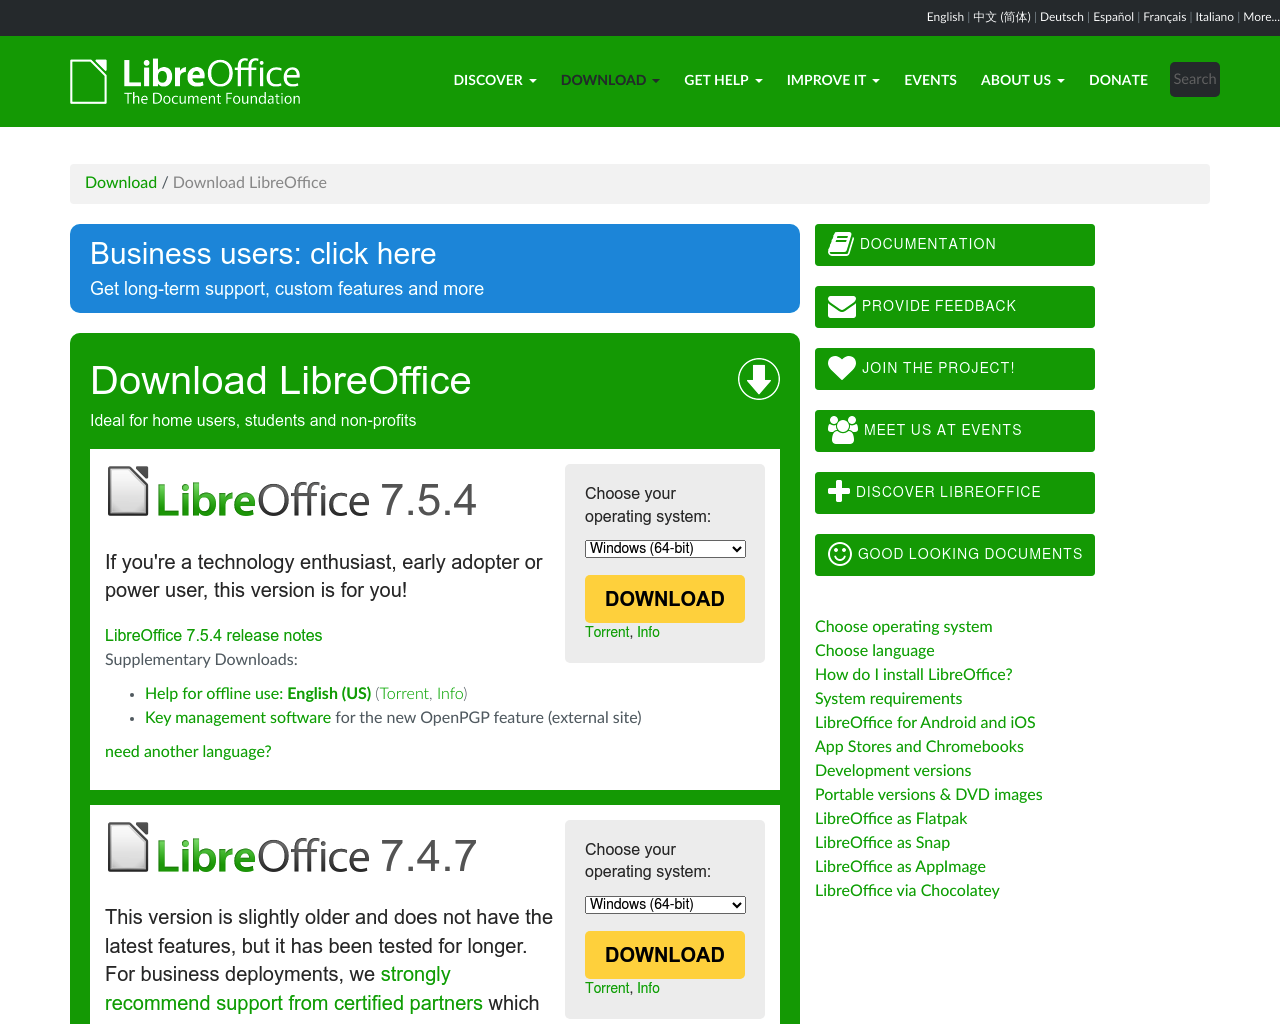 https://www.libreoffice.org/download/download-libreoffice/